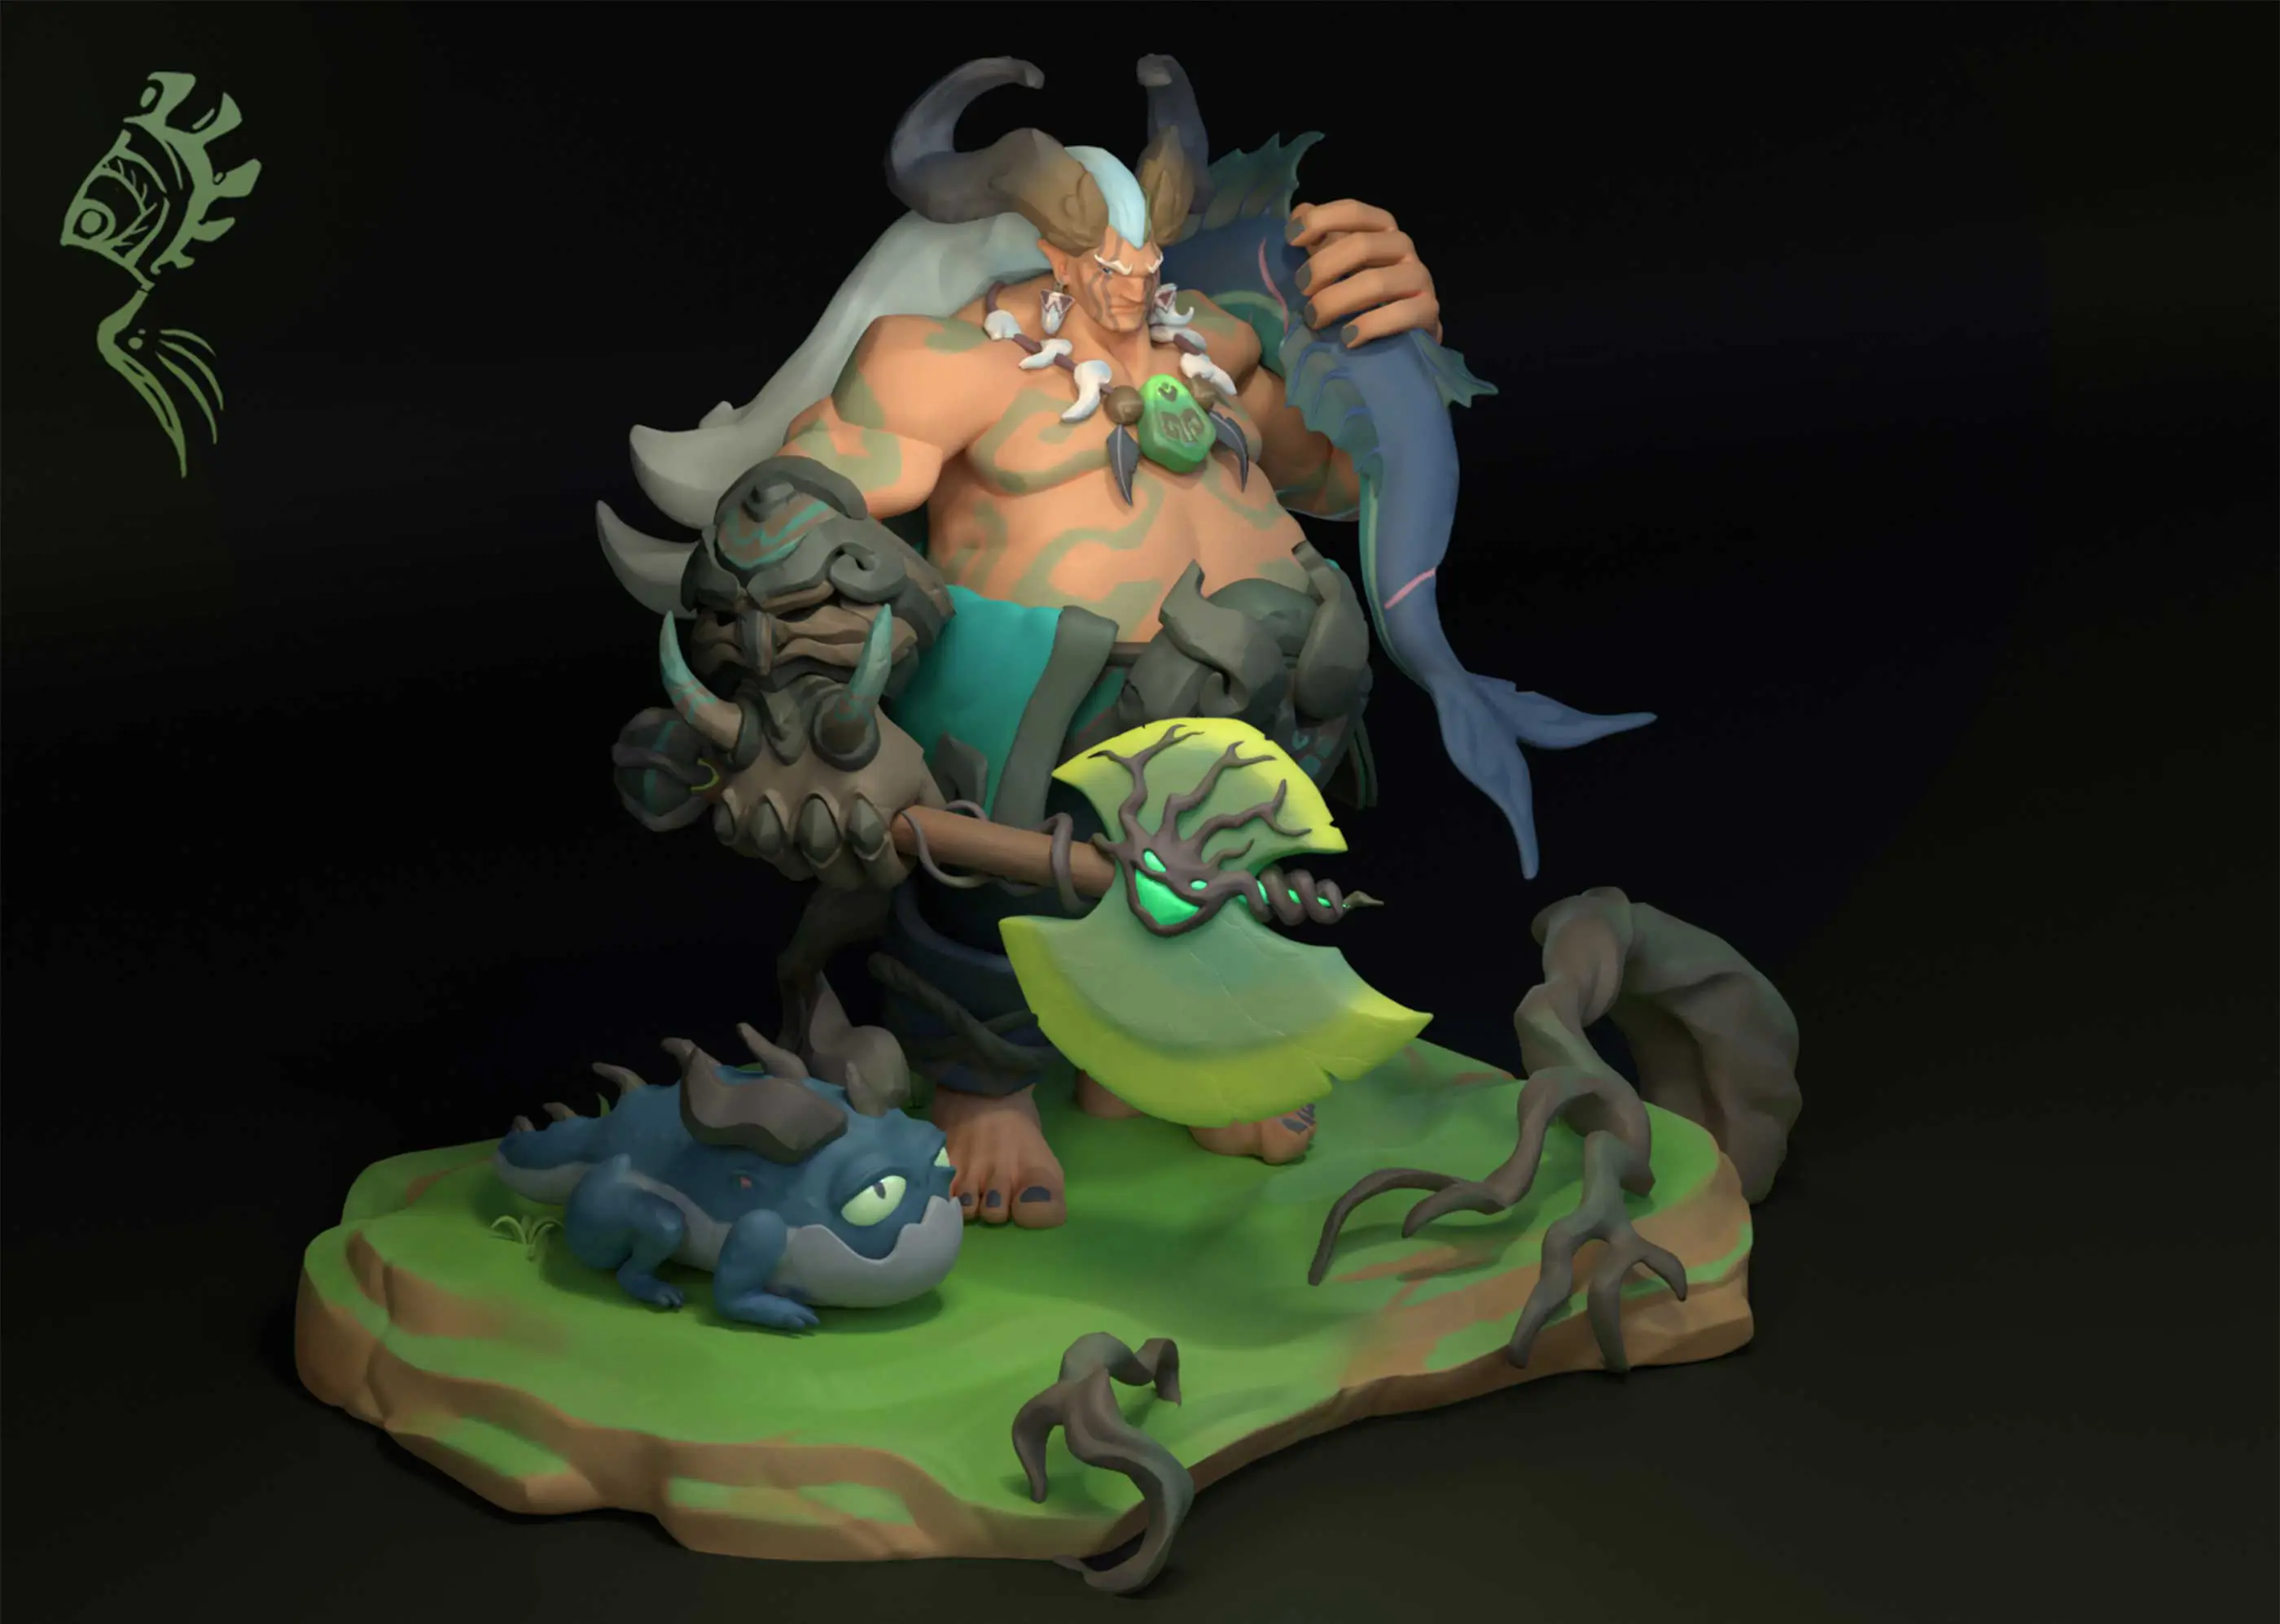 A 3D render of a large tribal man wielding an axe and large fish.